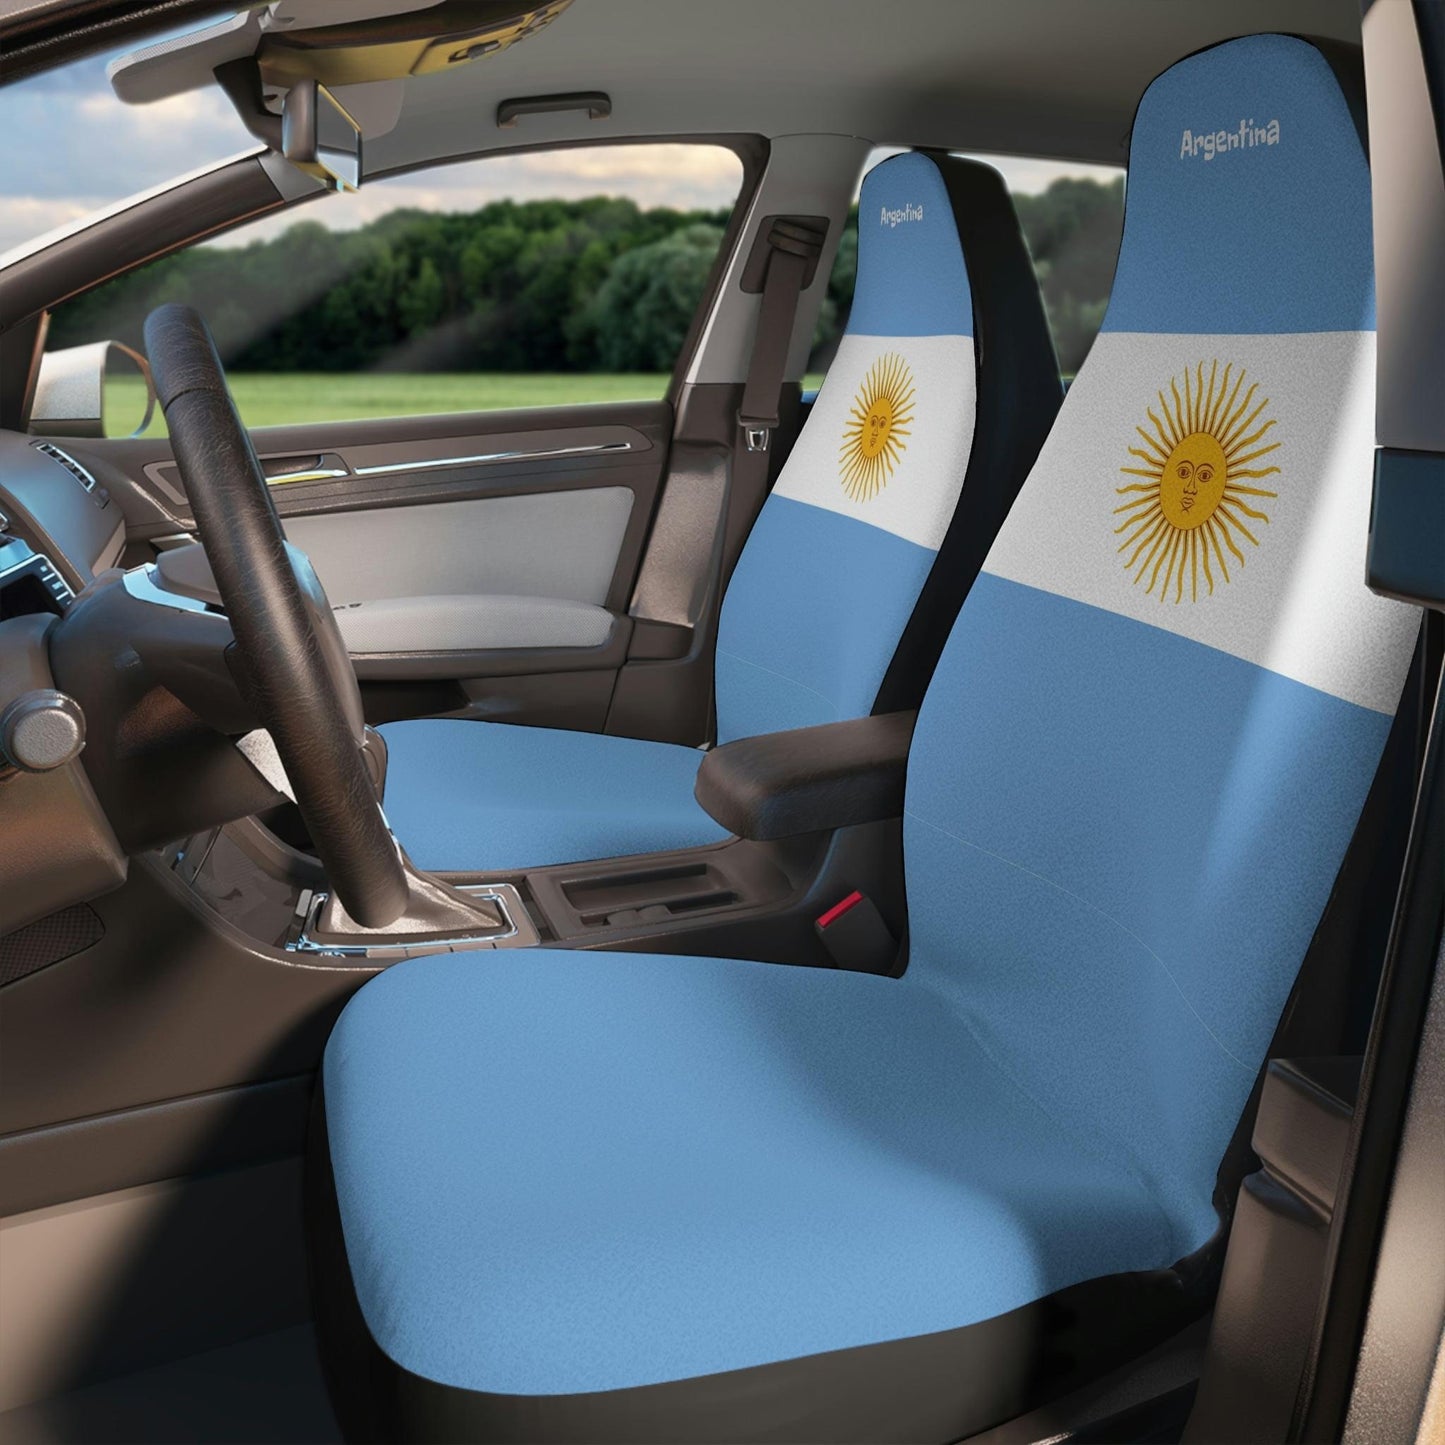 Argentina Flag Car Seat Covers Universal / Gift for car lovers